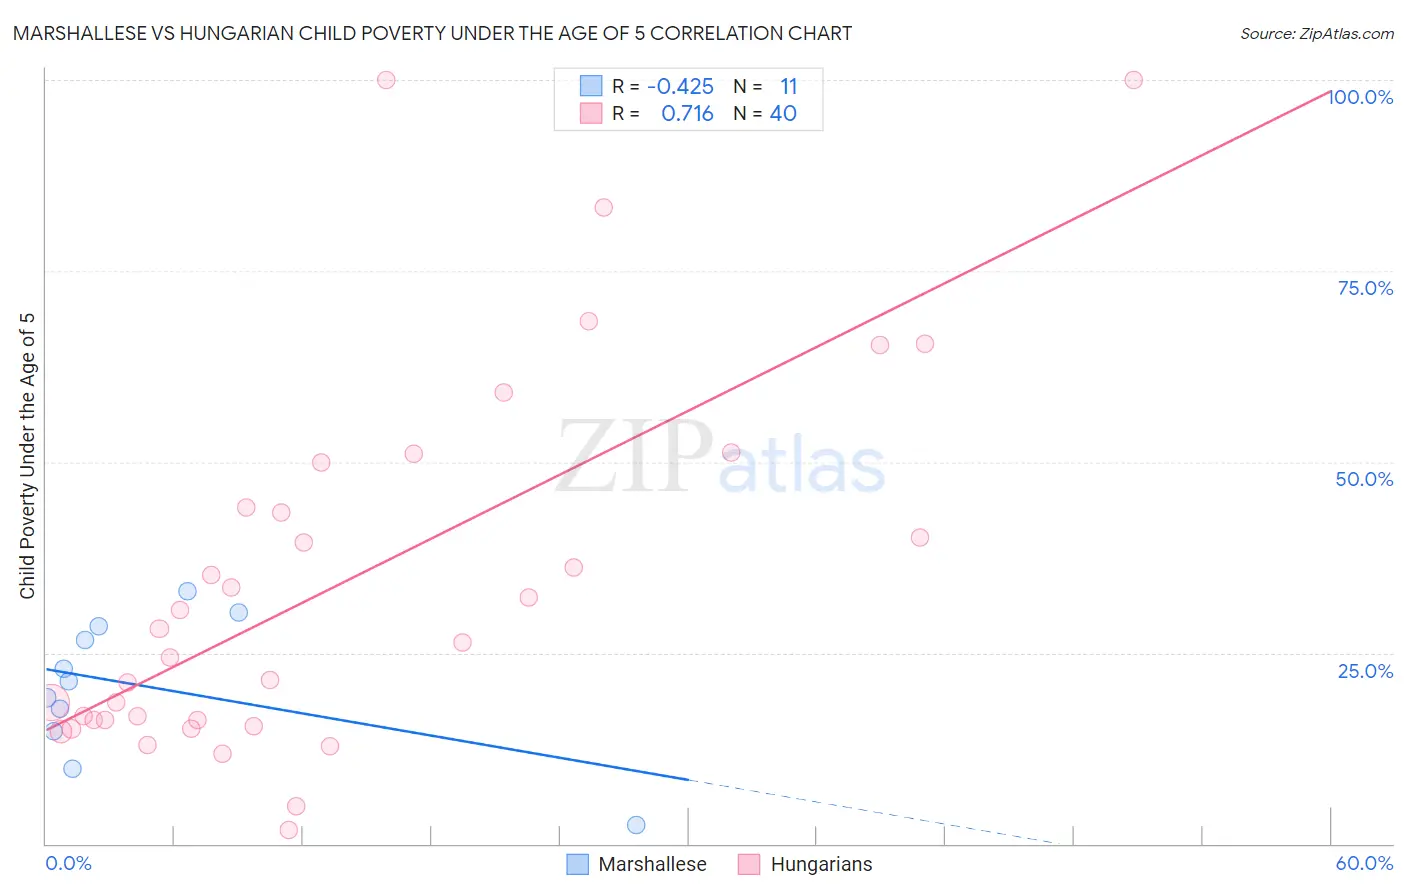 Marshallese vs Hungarian Child Poverty Under the Age of 5